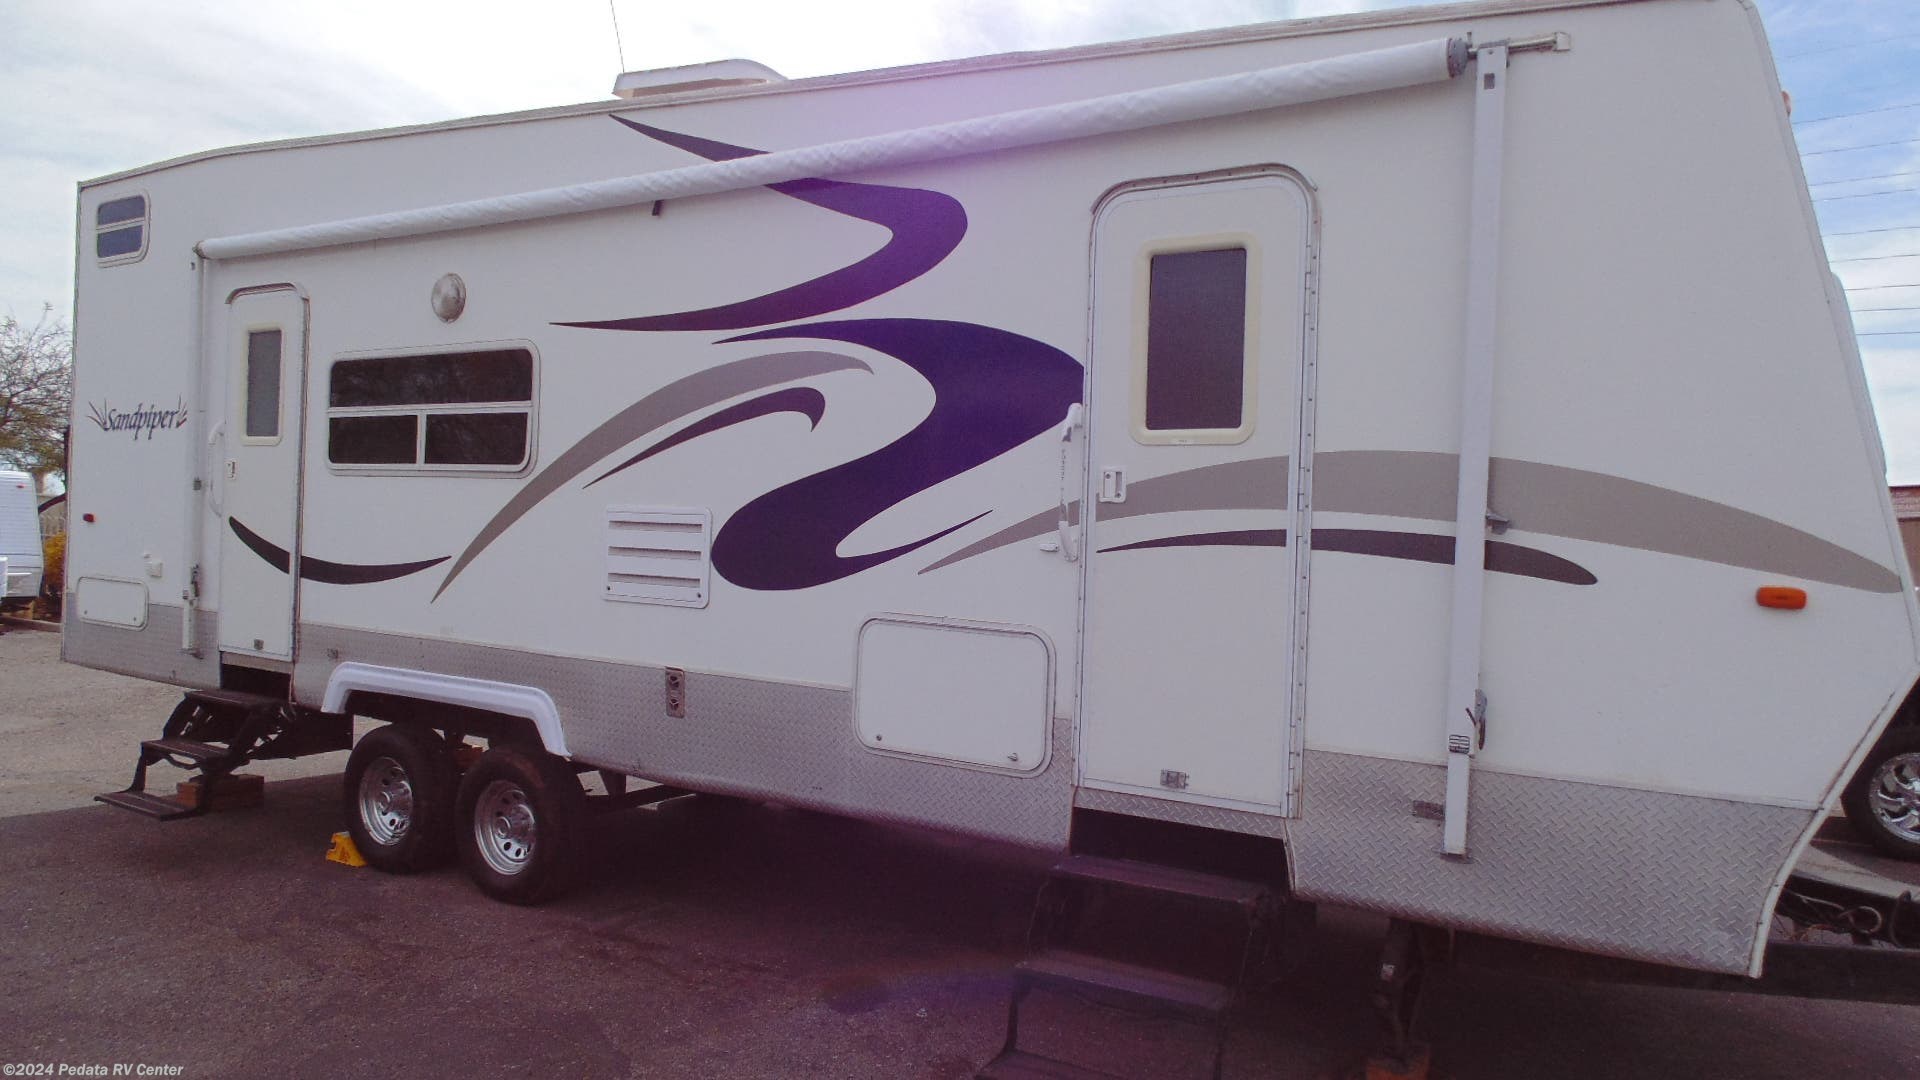 #12112 - Used 2004 Forest River Sandpiper 28SP Toy Hauler RV For Sale 2004 Forest River Sandpiper Toy Hauler Specs